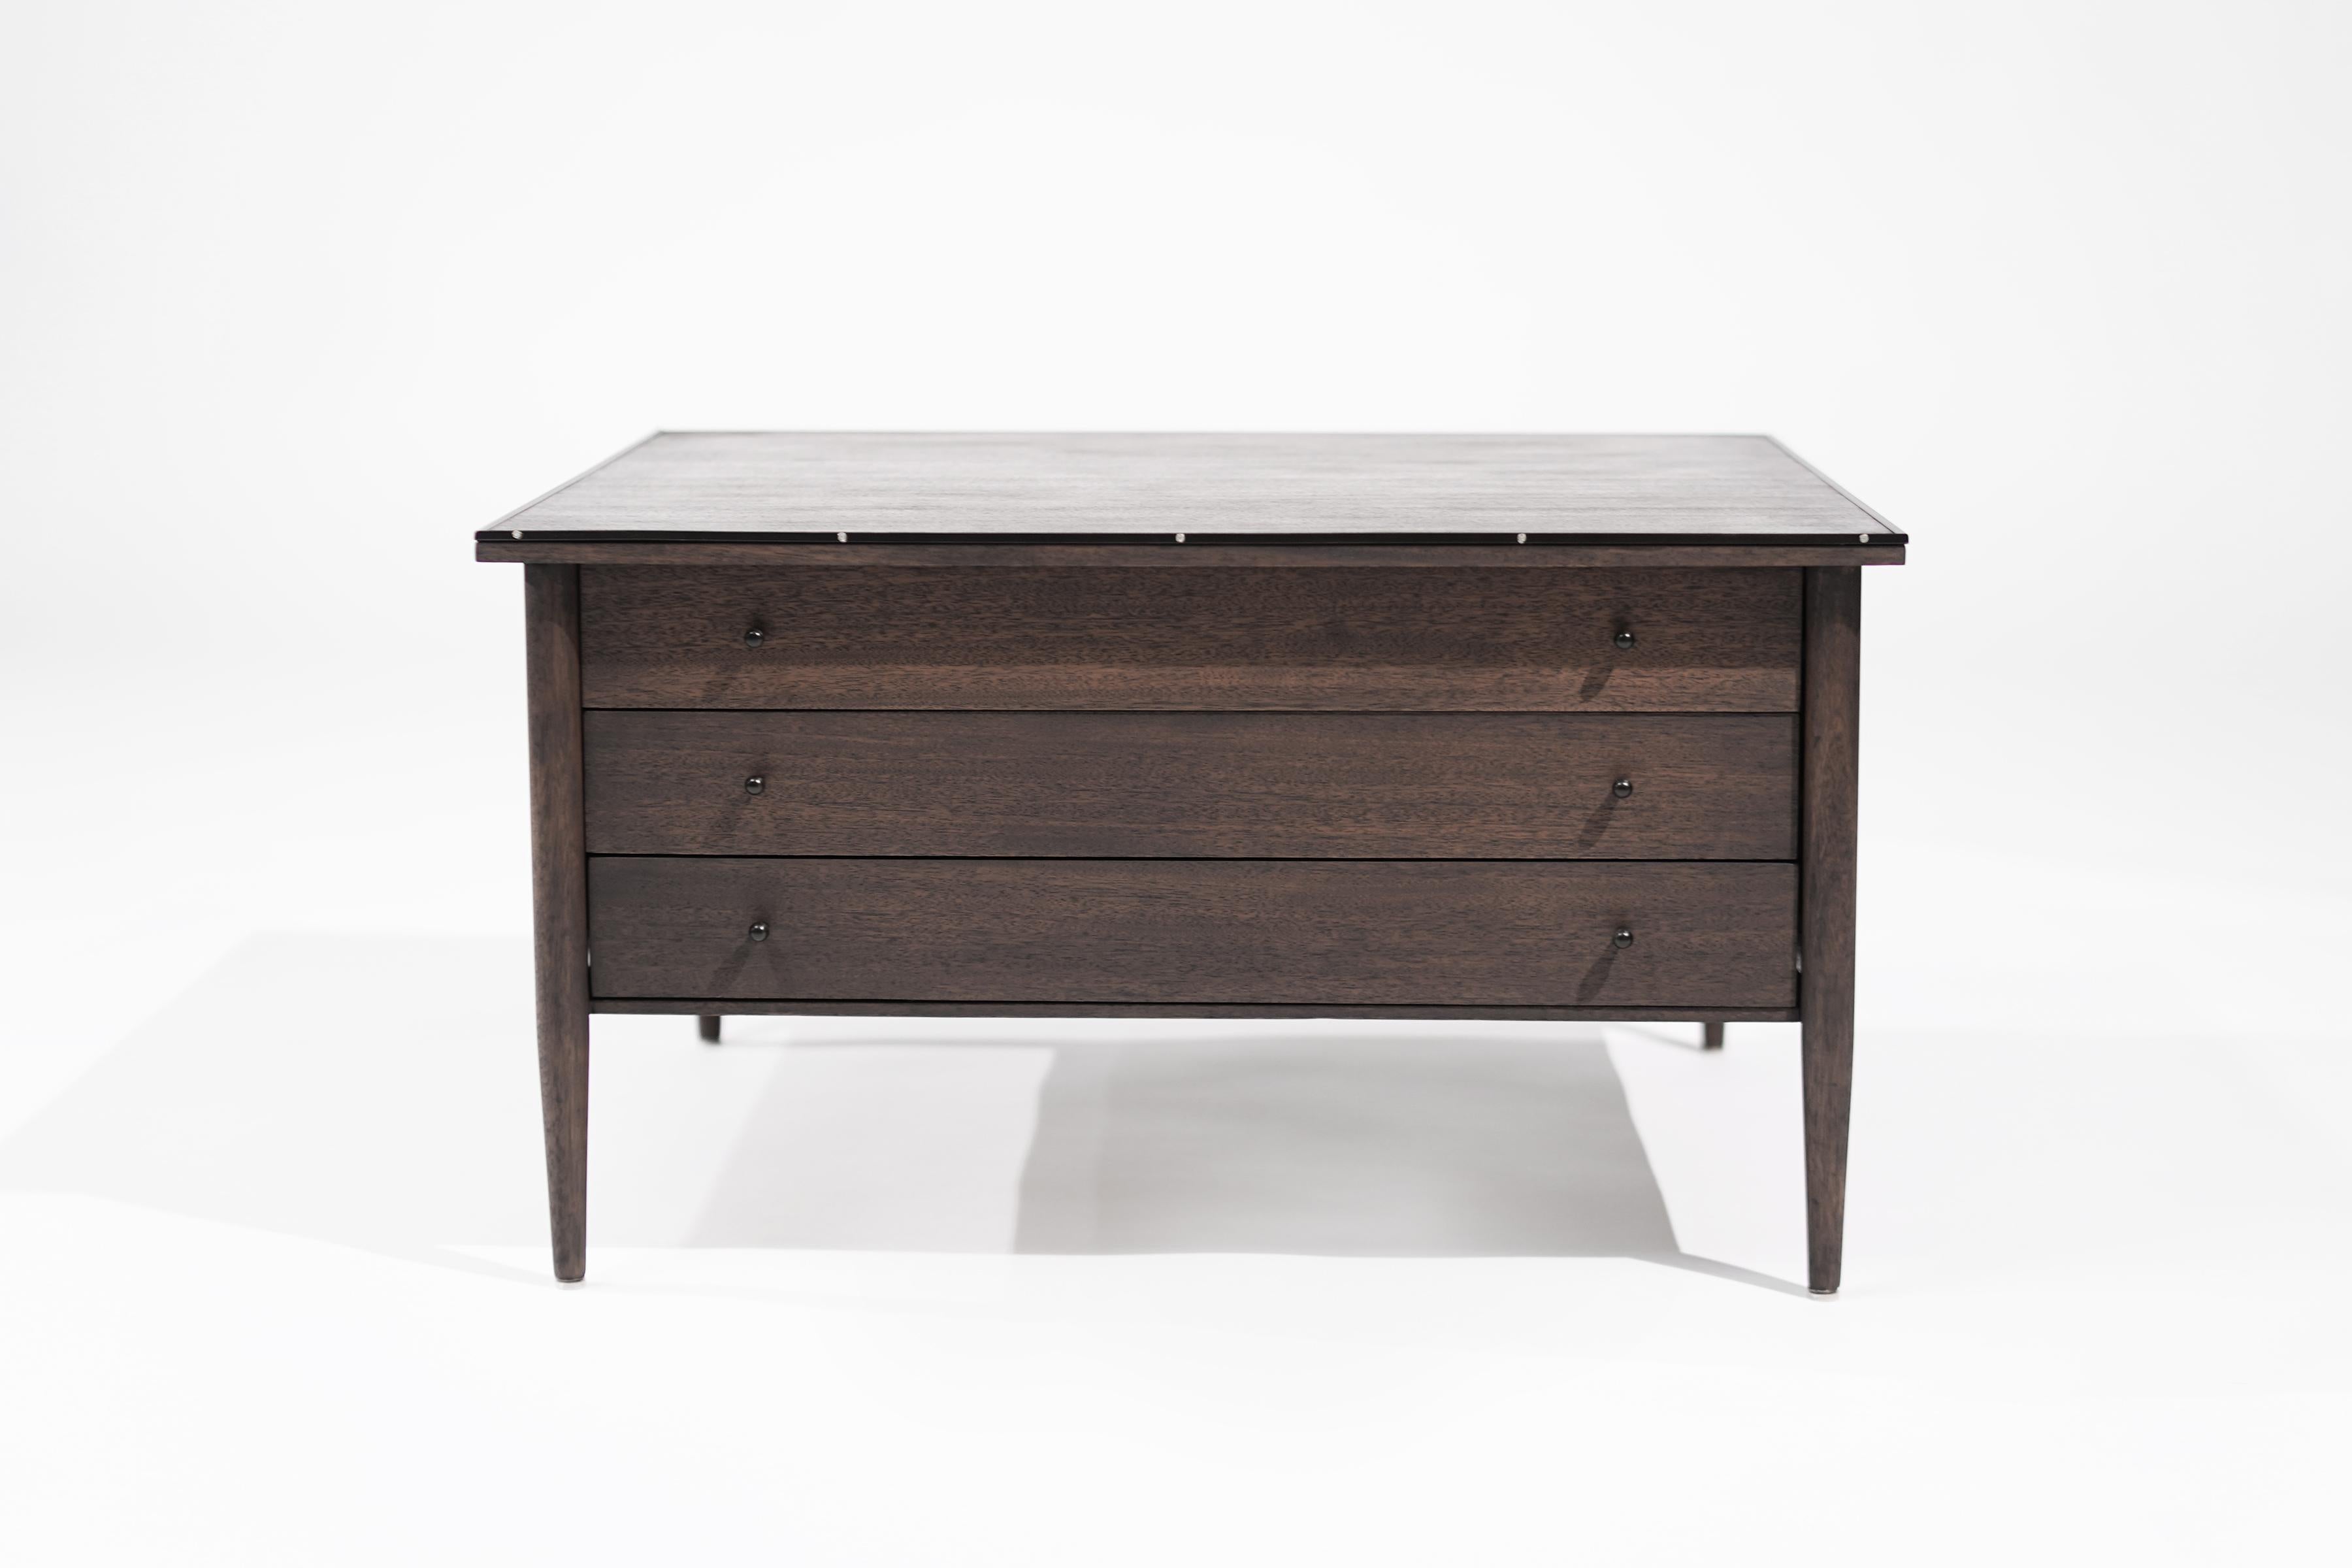 An Exceptional Vintage Connoisseur Collection Coffee Table by Paul McCobb, crafted in the 1950s. Meticulously fashioned from luxurious mahogany and enhanced with our signature organic zero VOC matte finish (no volatile organic compounds), This table